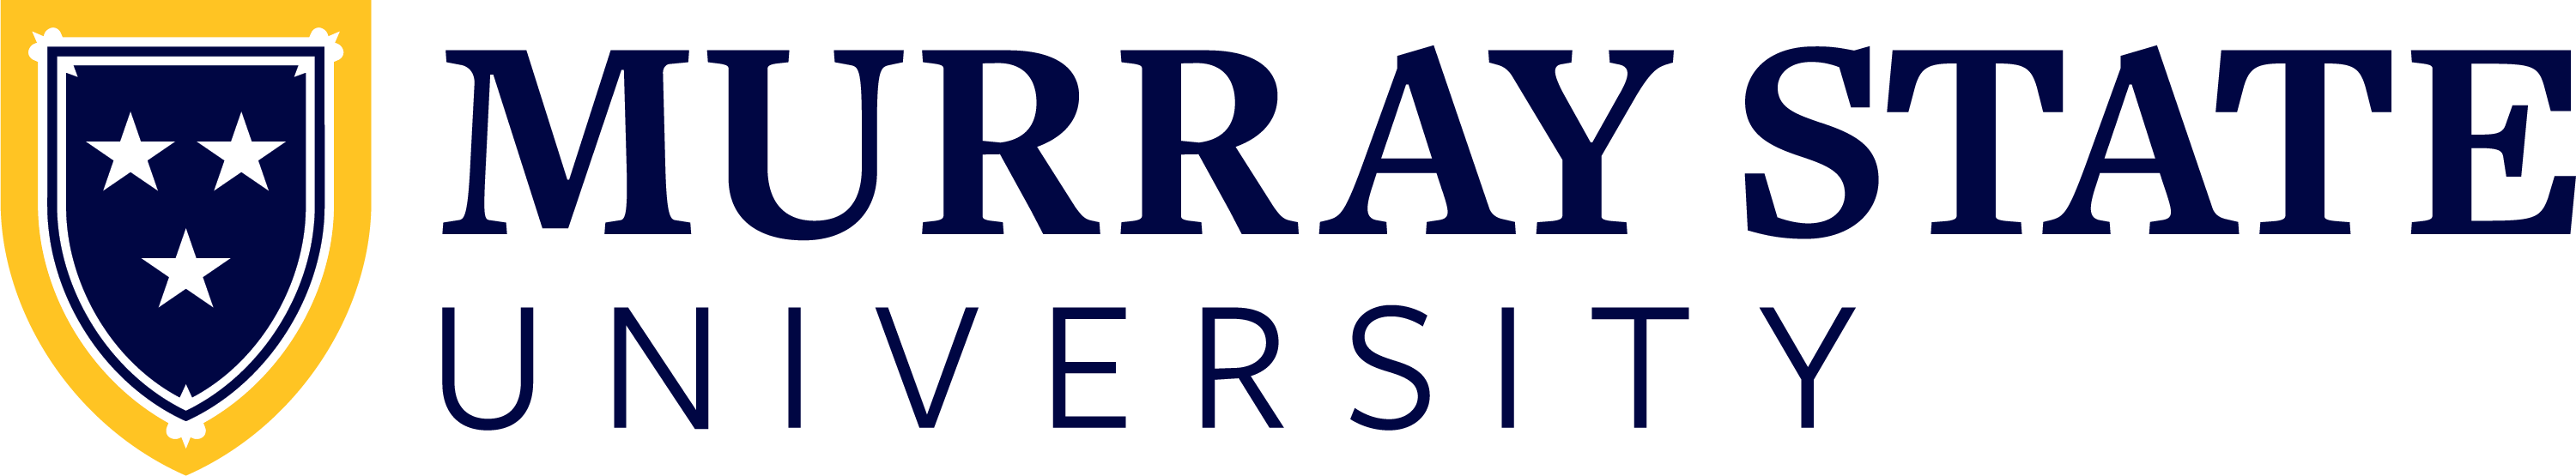 Murray State primary logo